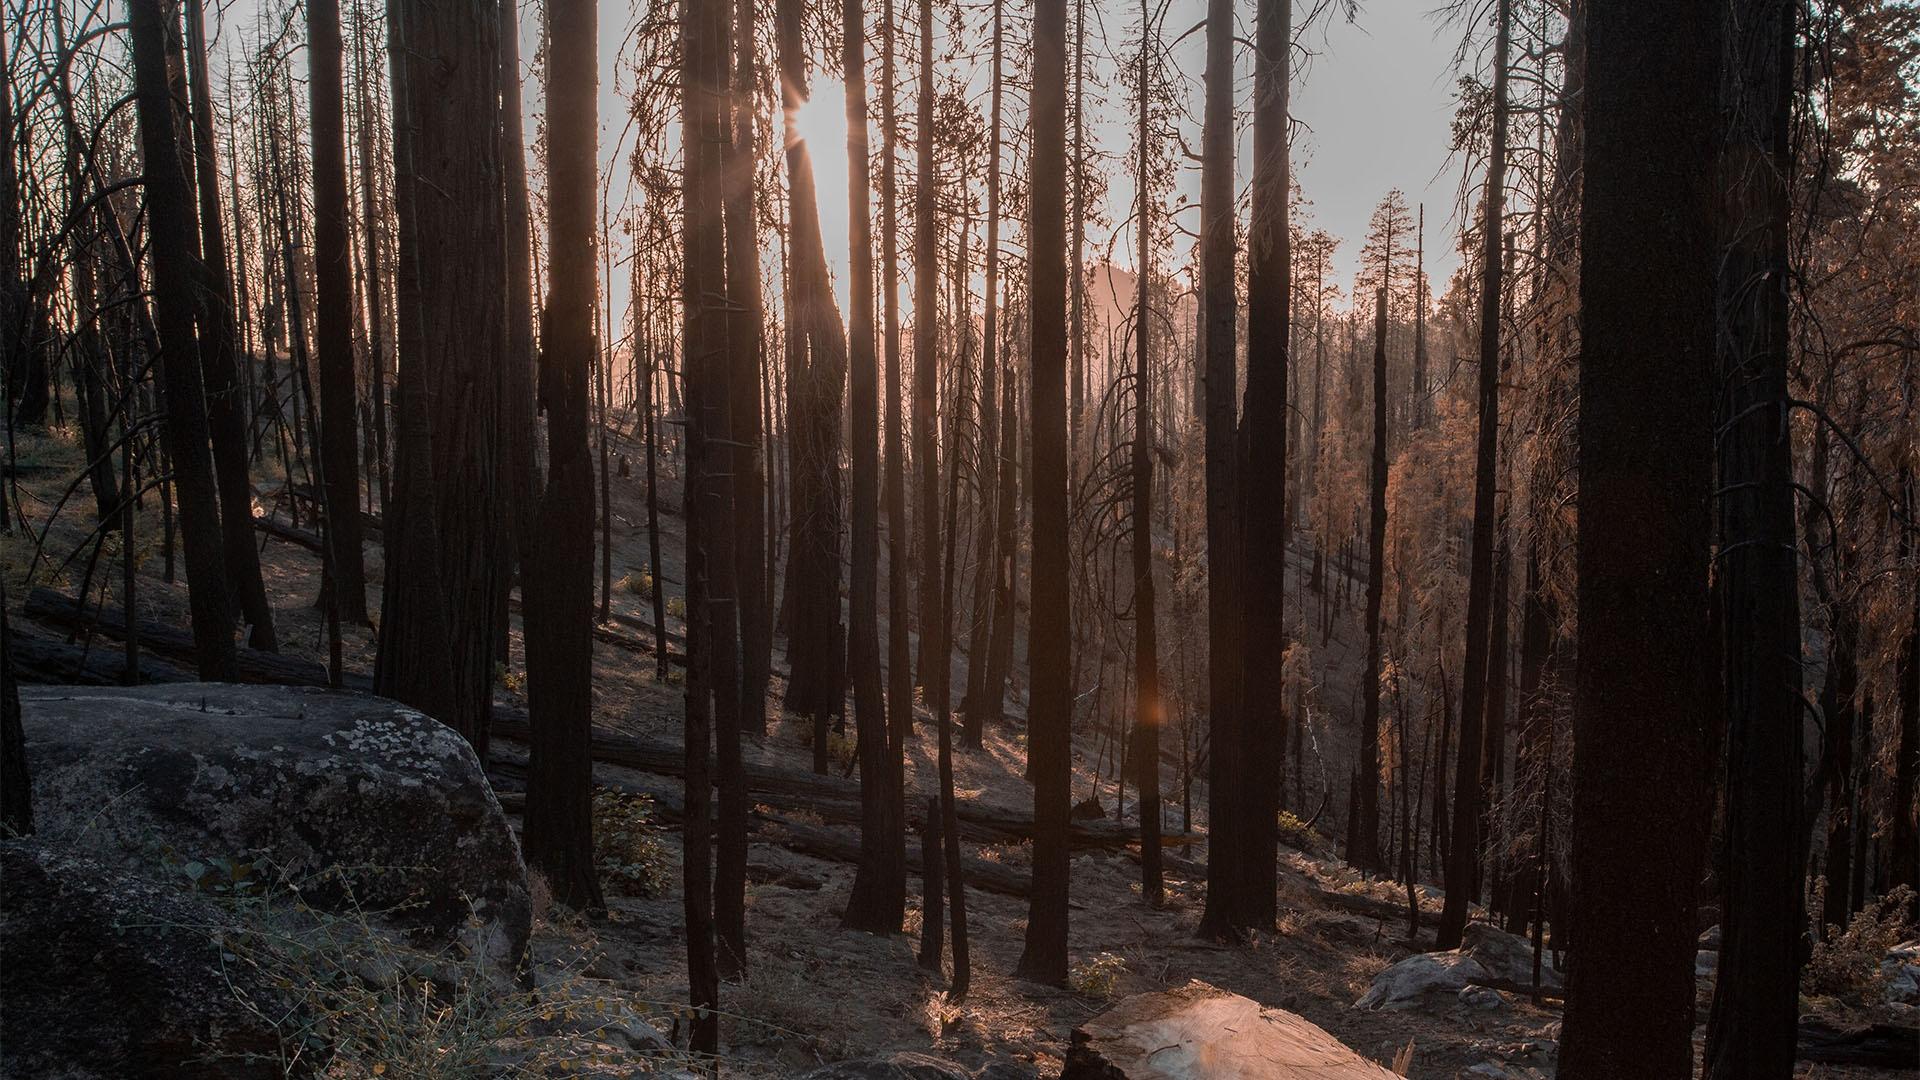 Image of burnt forest trees.